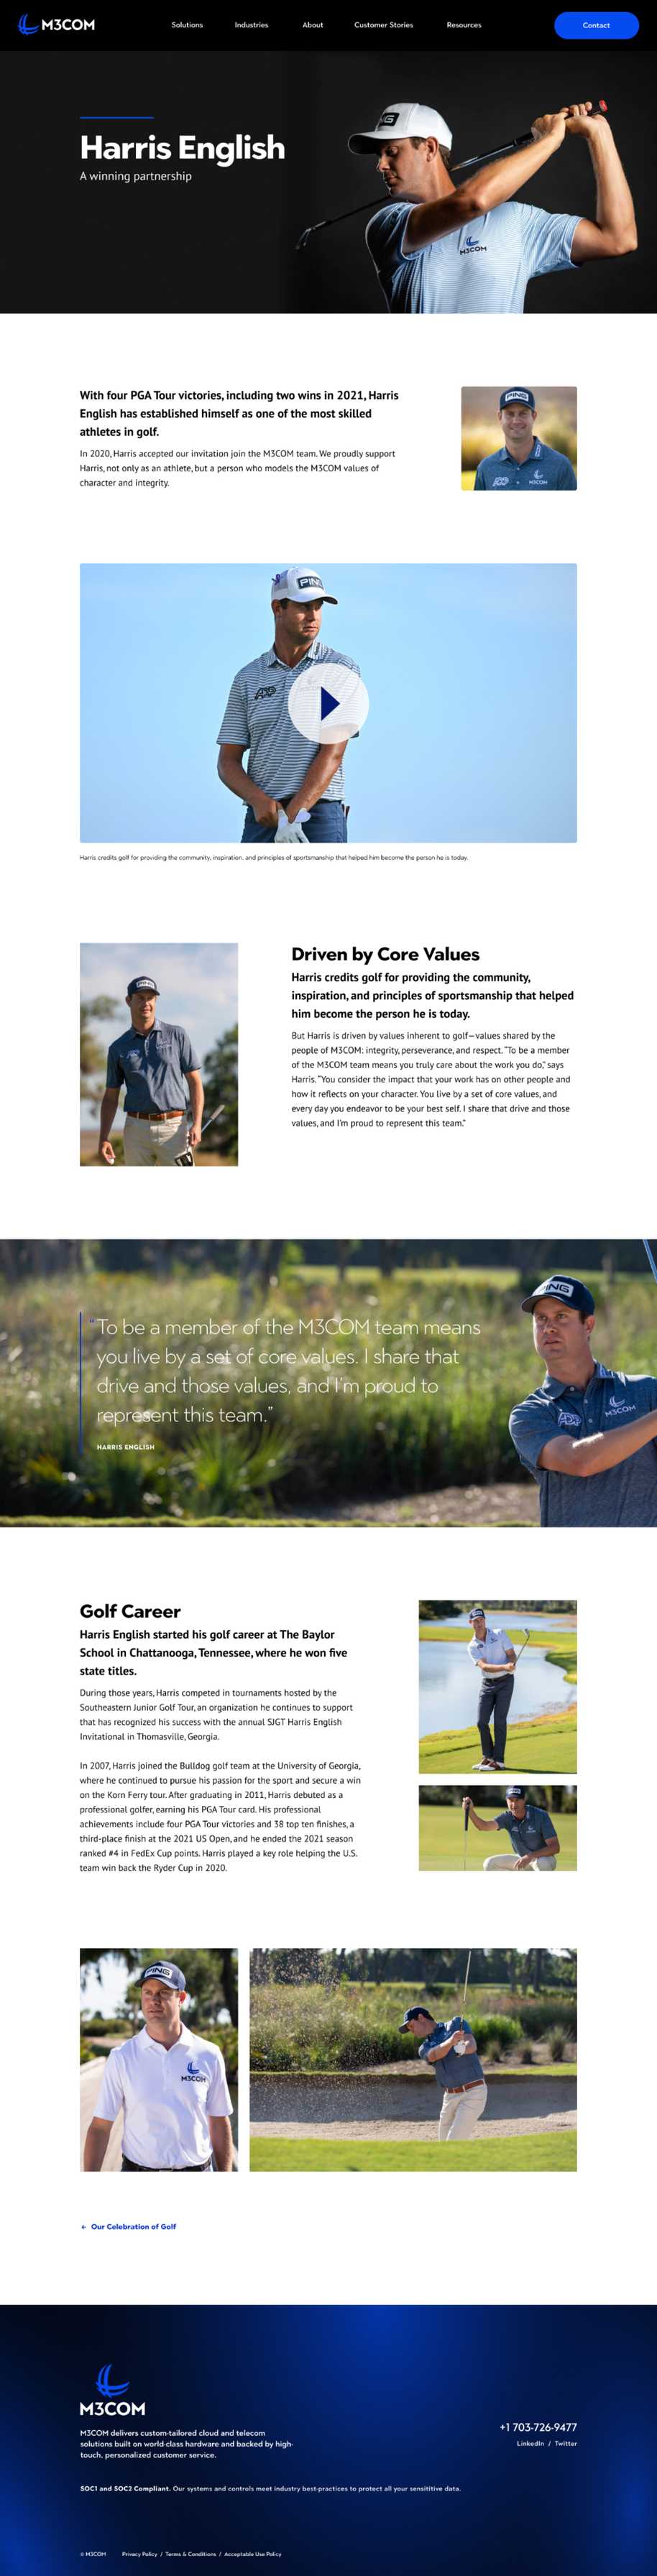 Biography page of sponsored golf players by M3COM